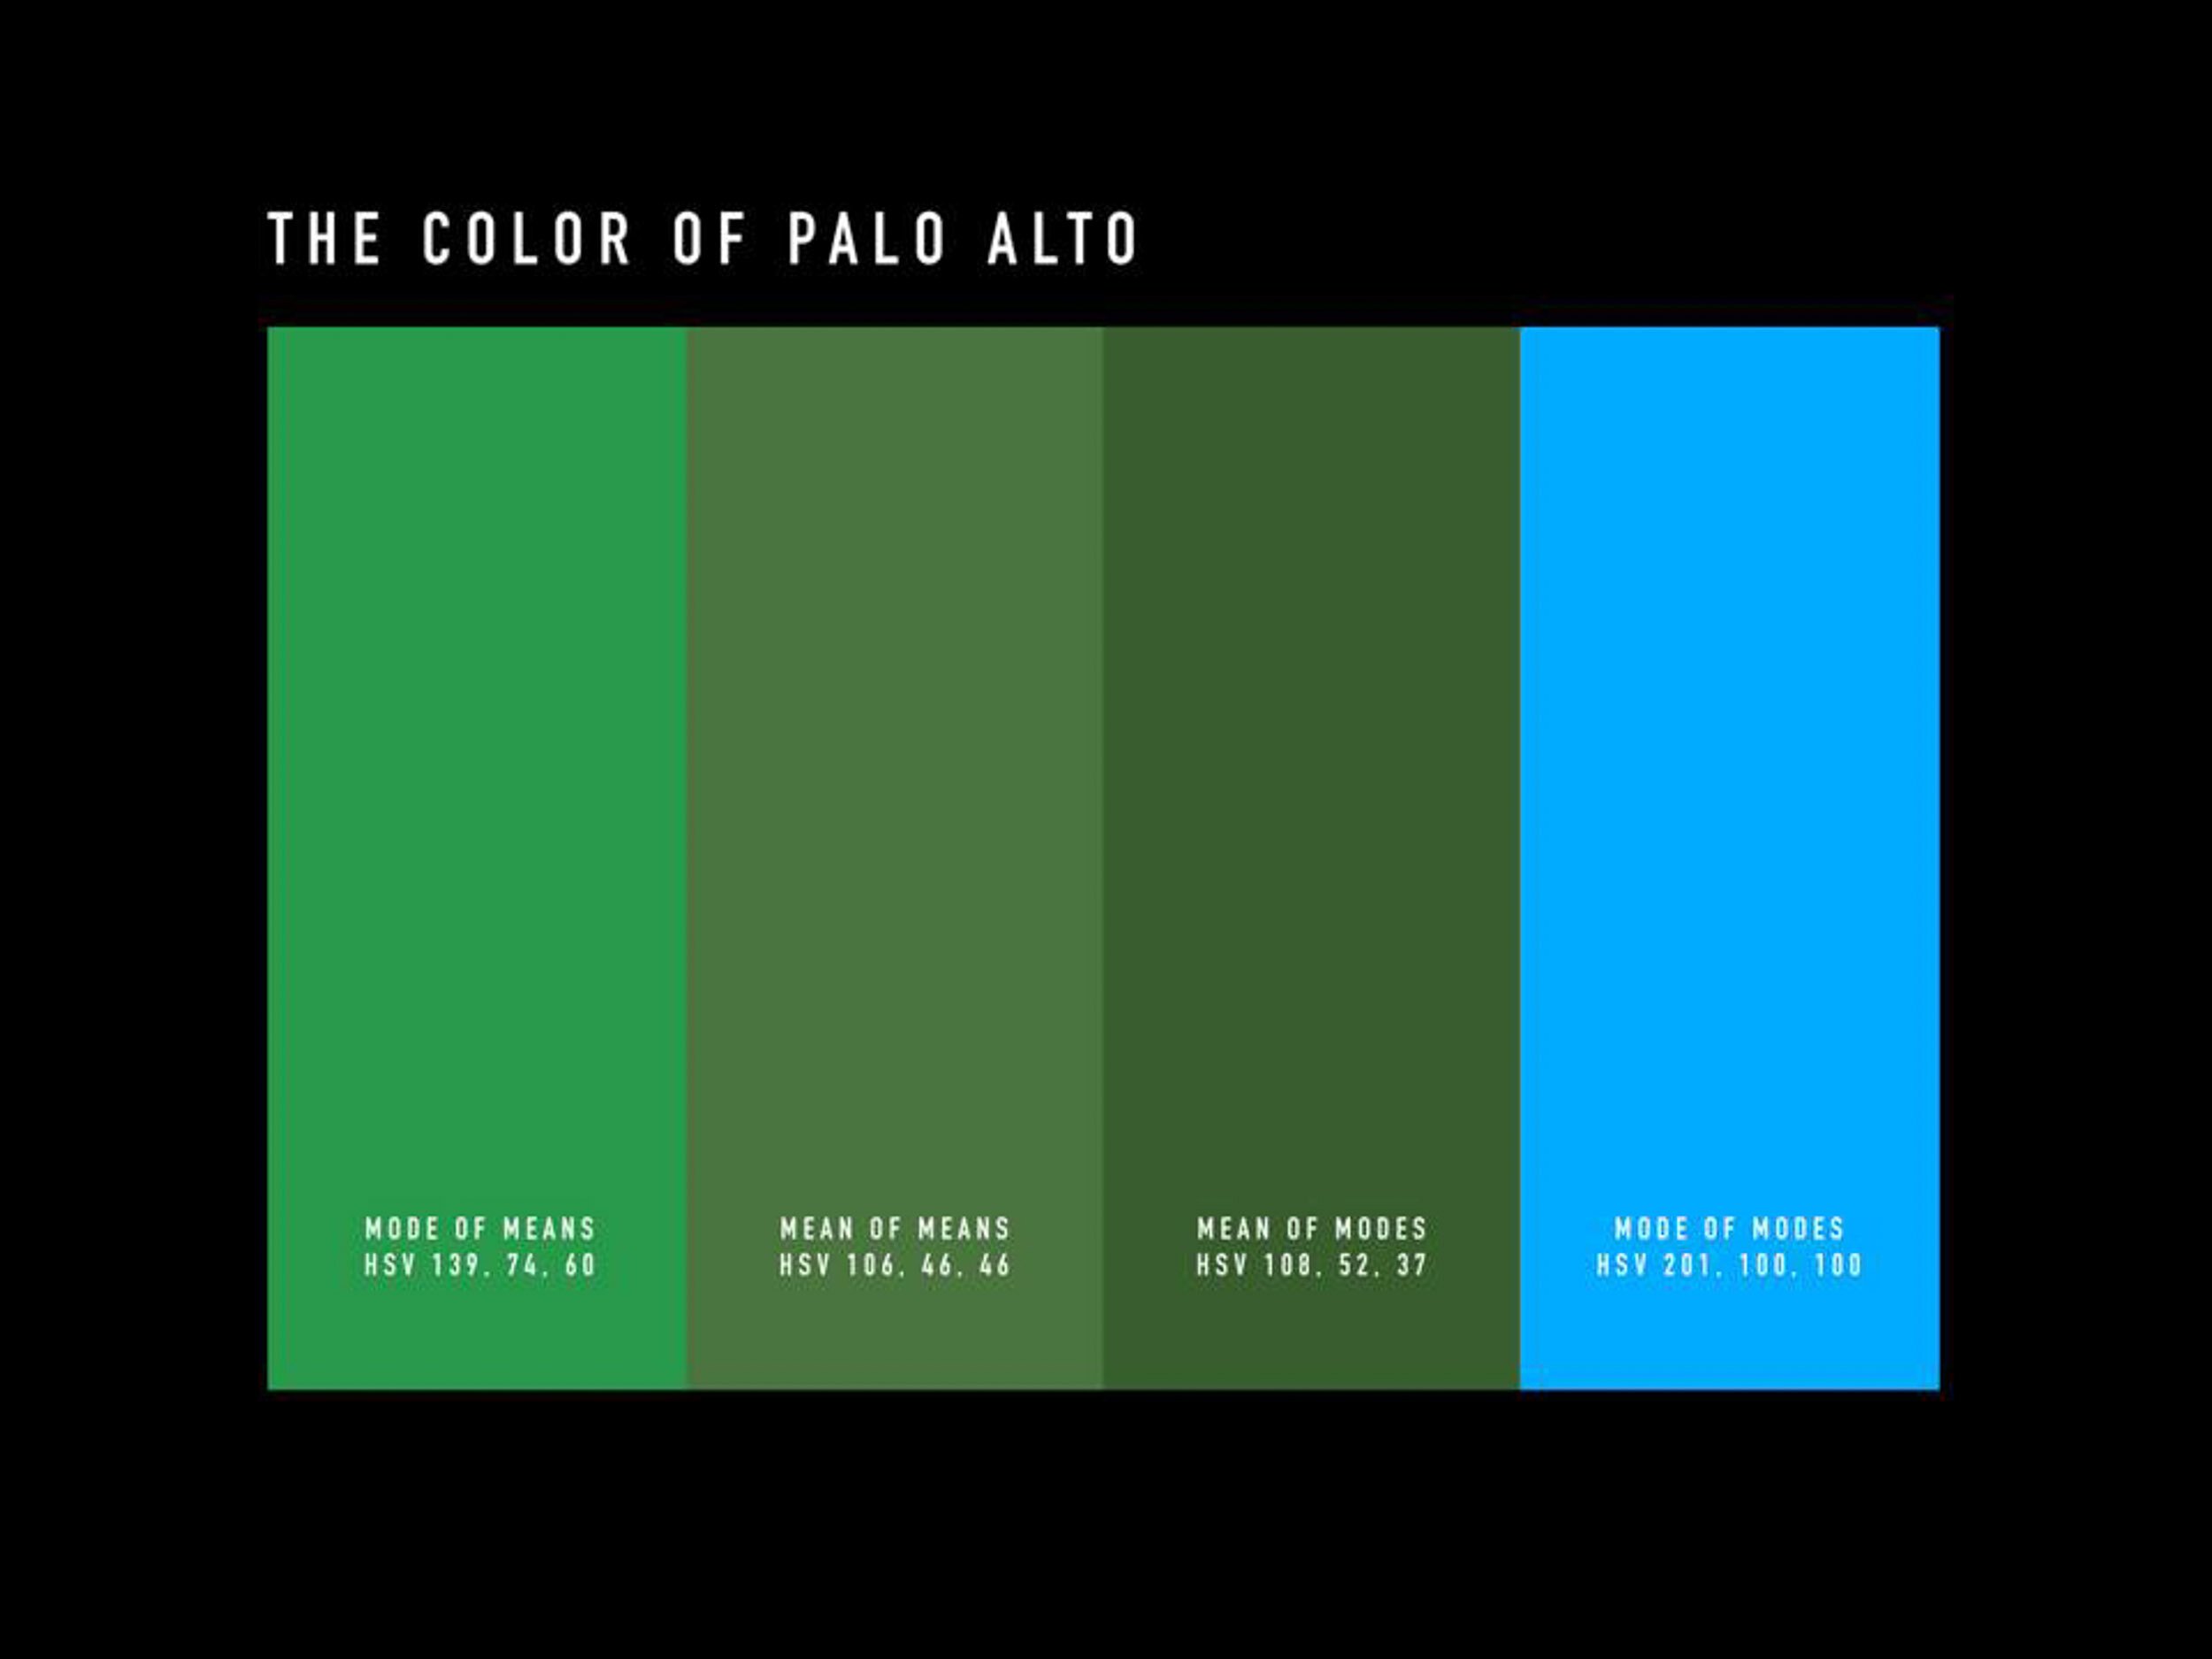  “The Color of Palo Alto” an art project by Samuel Yates, where he photographed every house and building in Palo Alto to determine an average color value. 